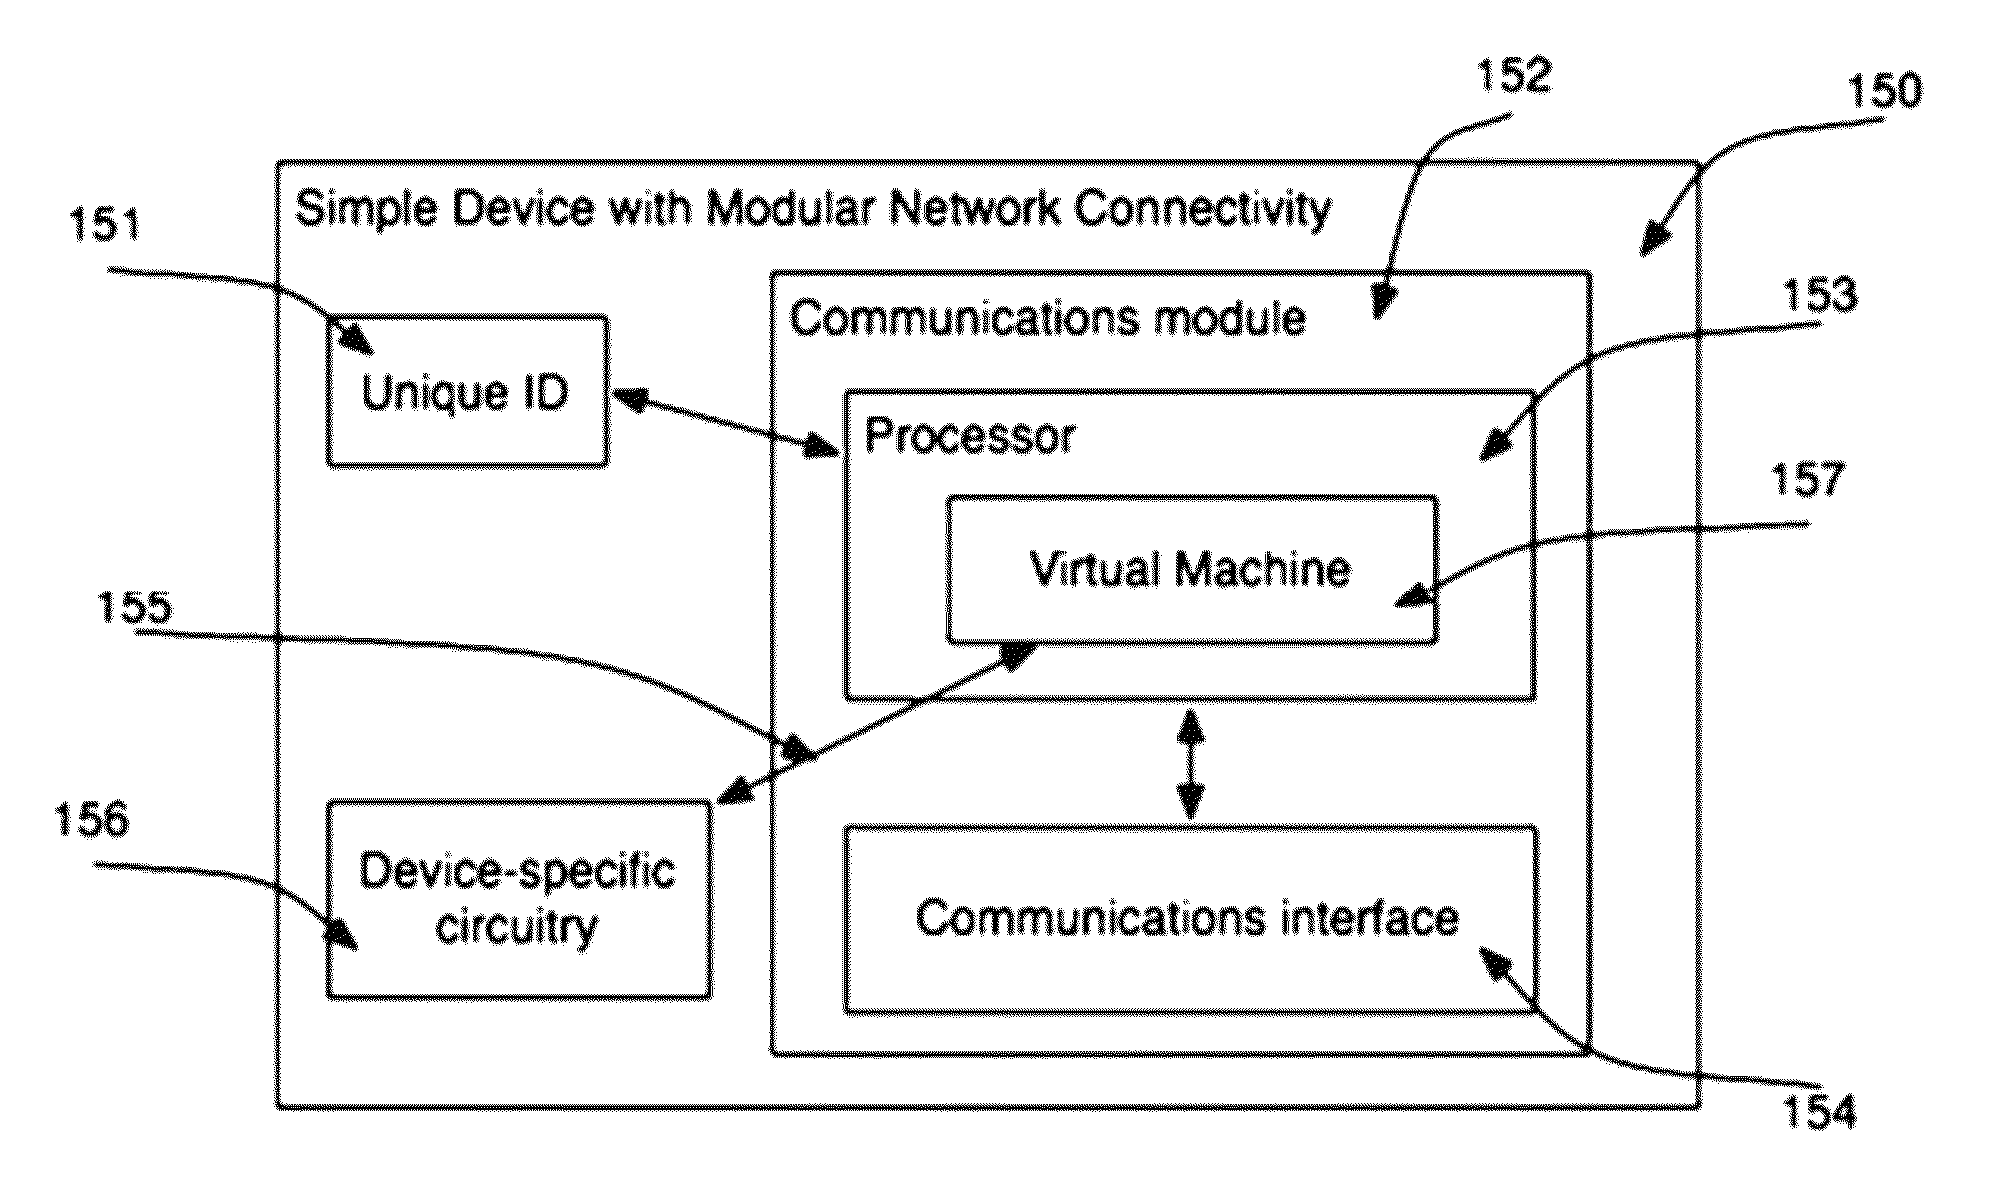 Modularized control system to enable networked control and sensing of other devices